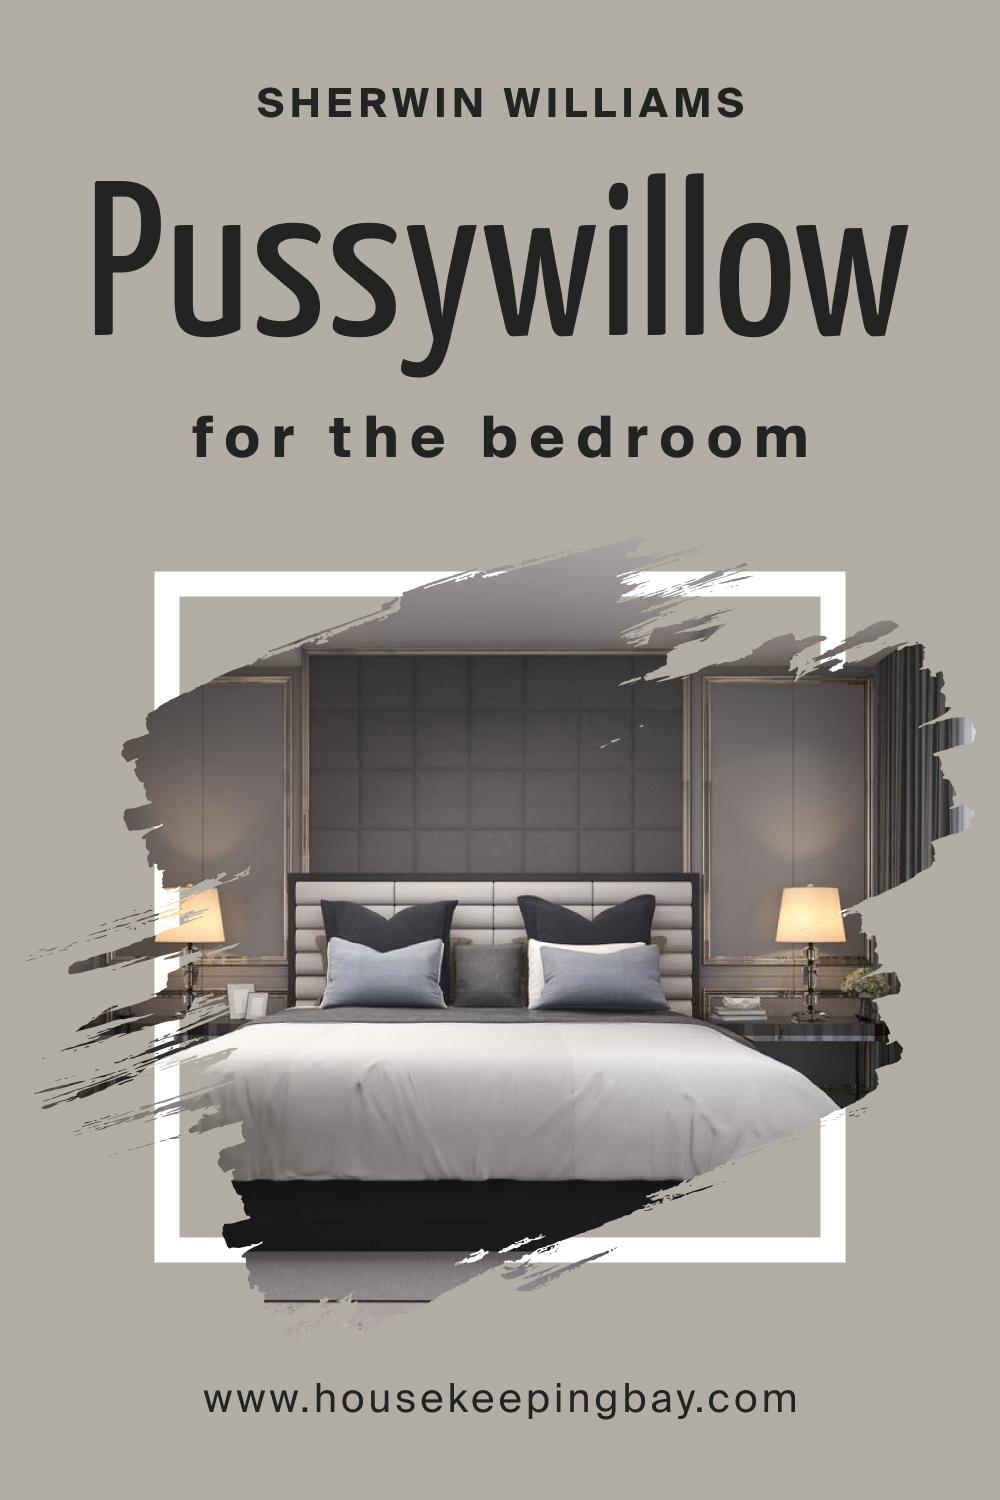 Sherwin Williams. Pussywillow SW 7643 For the bedroom